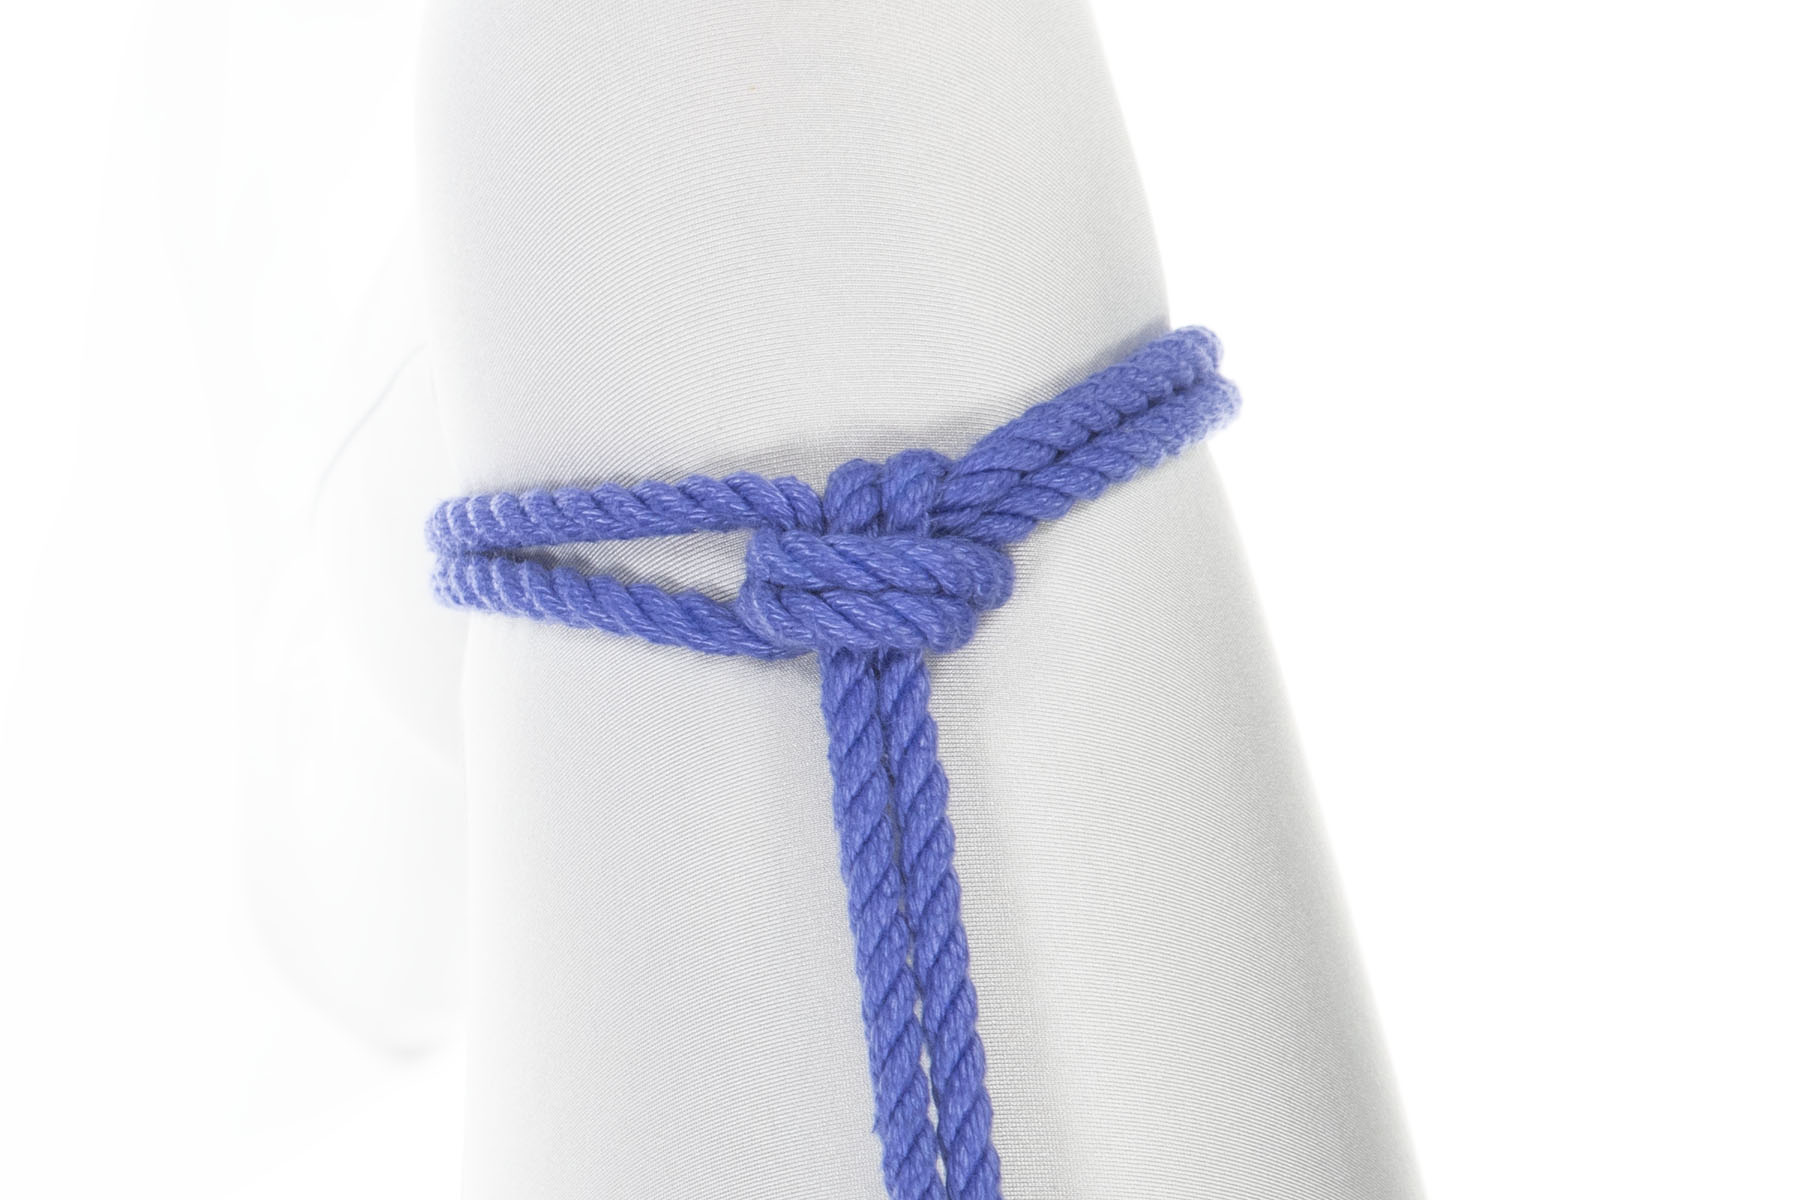 A blue rope has been tied around a thigh in a single column tie with a single wrap. The rope is pulled up the thigh, toward the body.